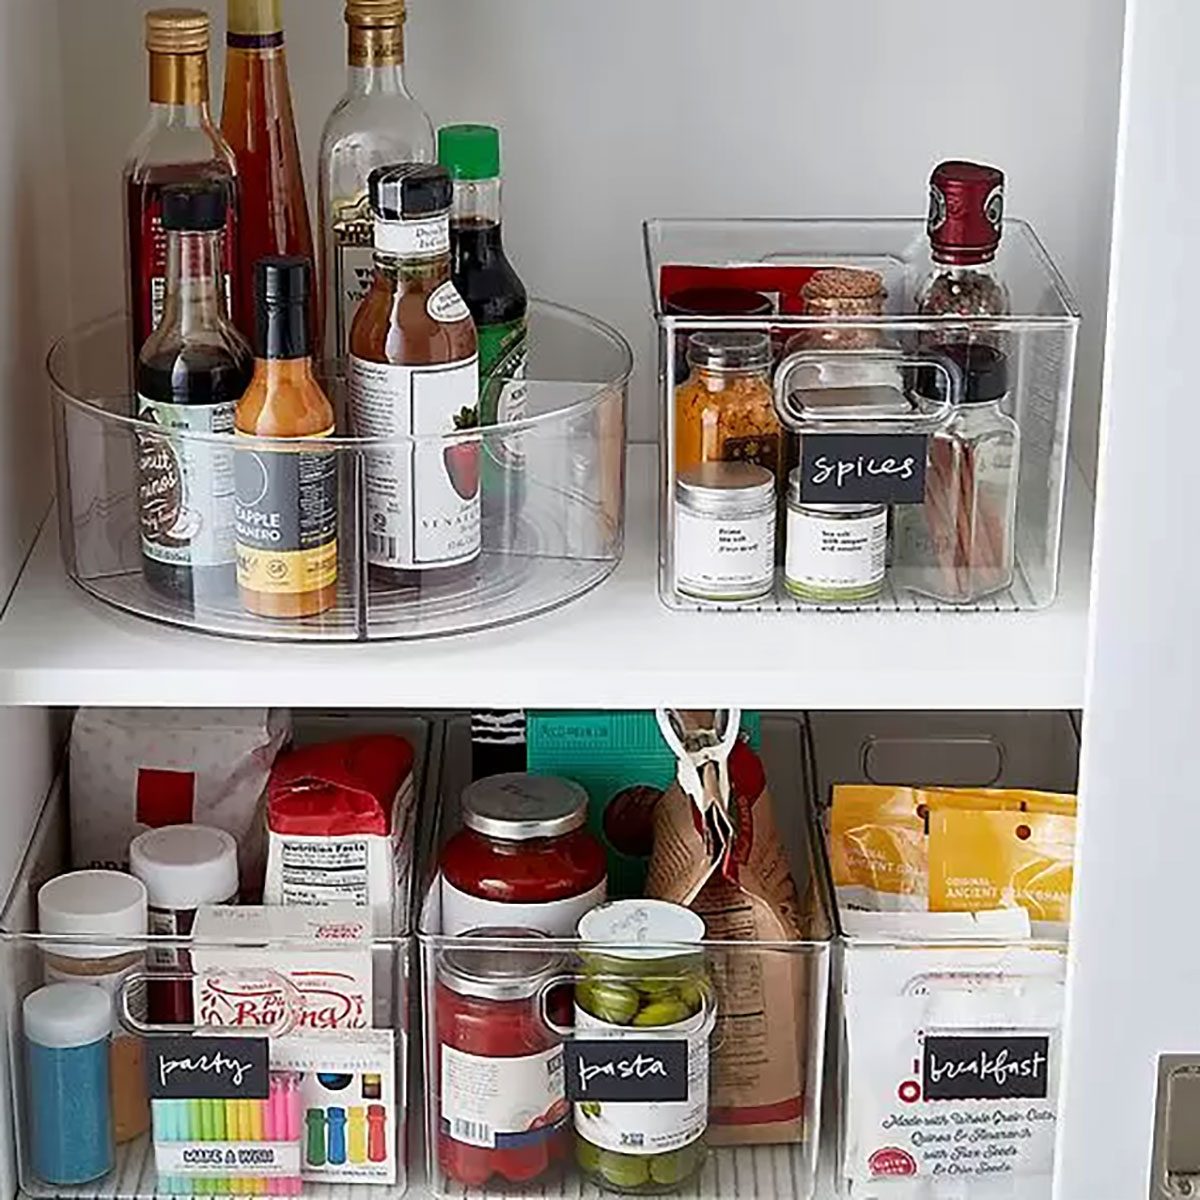 9 Spice Storage Ideas You'll Want To Try In Your Kitchen